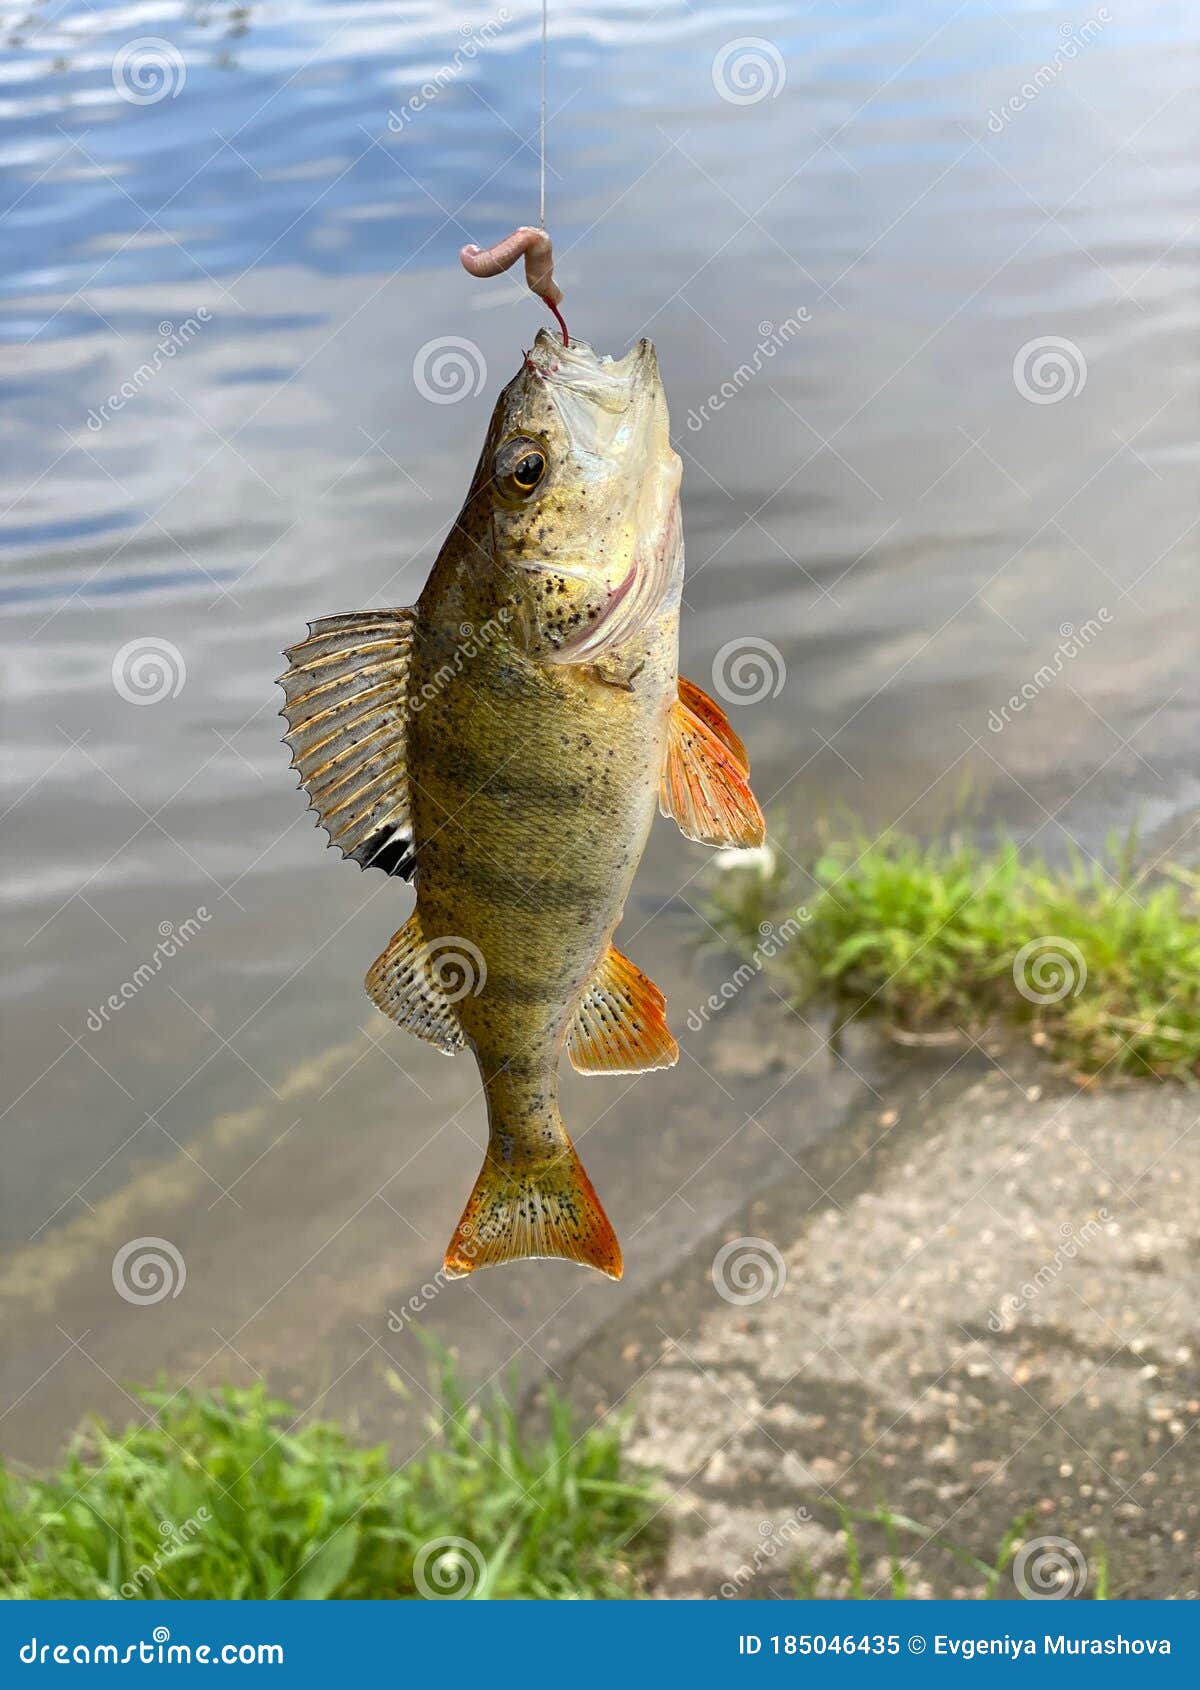 Fish Perch Hanging on a Hook with a Worm Caught on a Fishing Trip